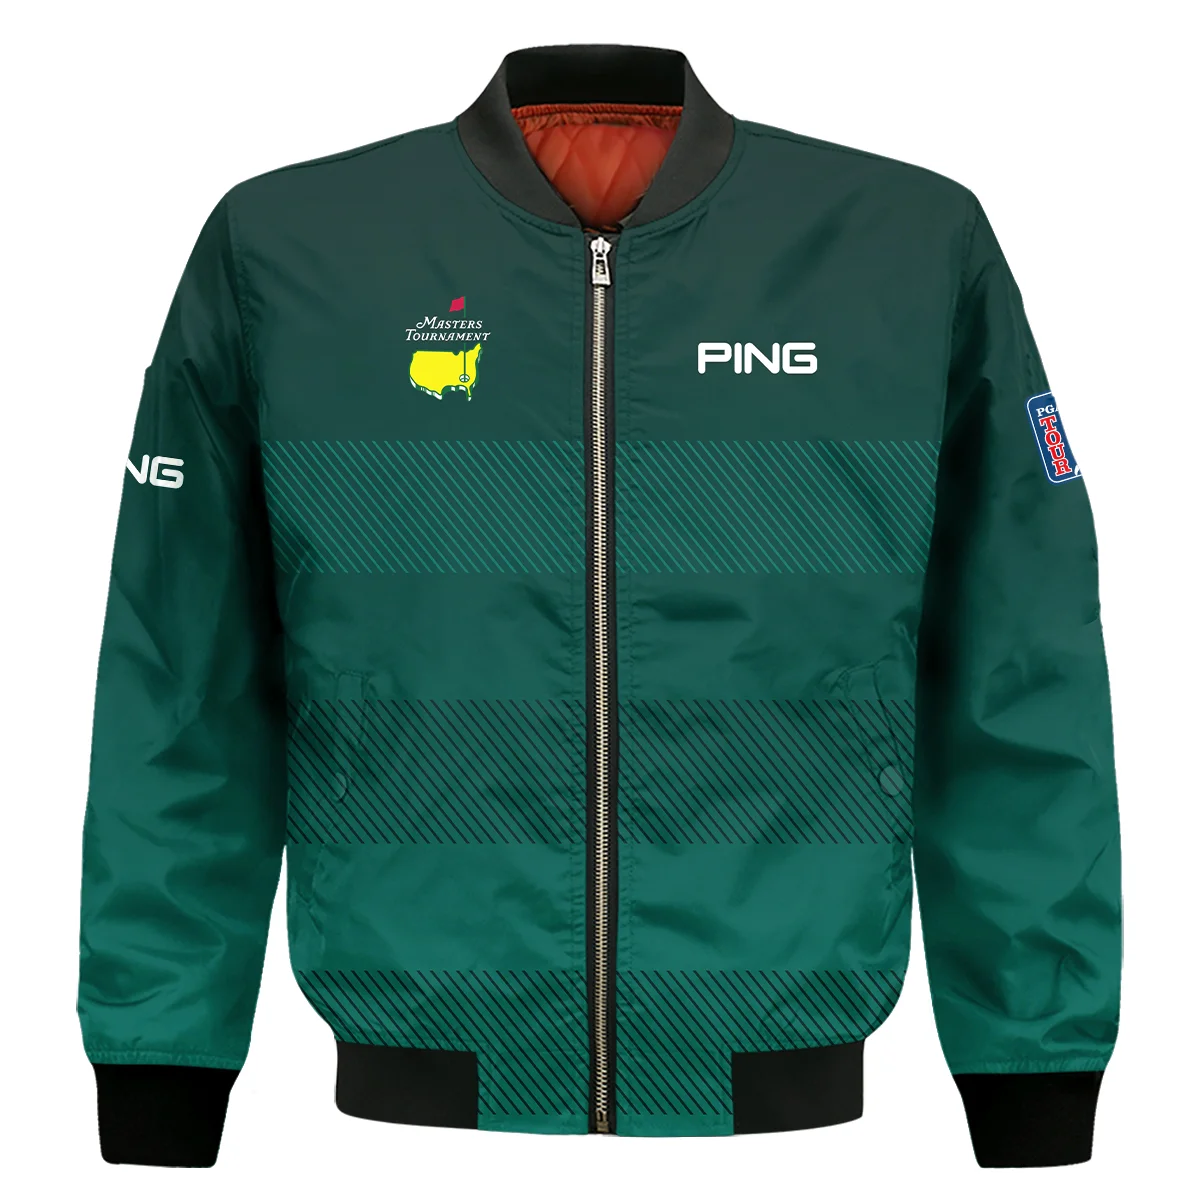 Ping Masters Tournament Dark Green Gradient Stripes Pattern Golf Sport Bomber Jacket Style Classic Bomber Jacket